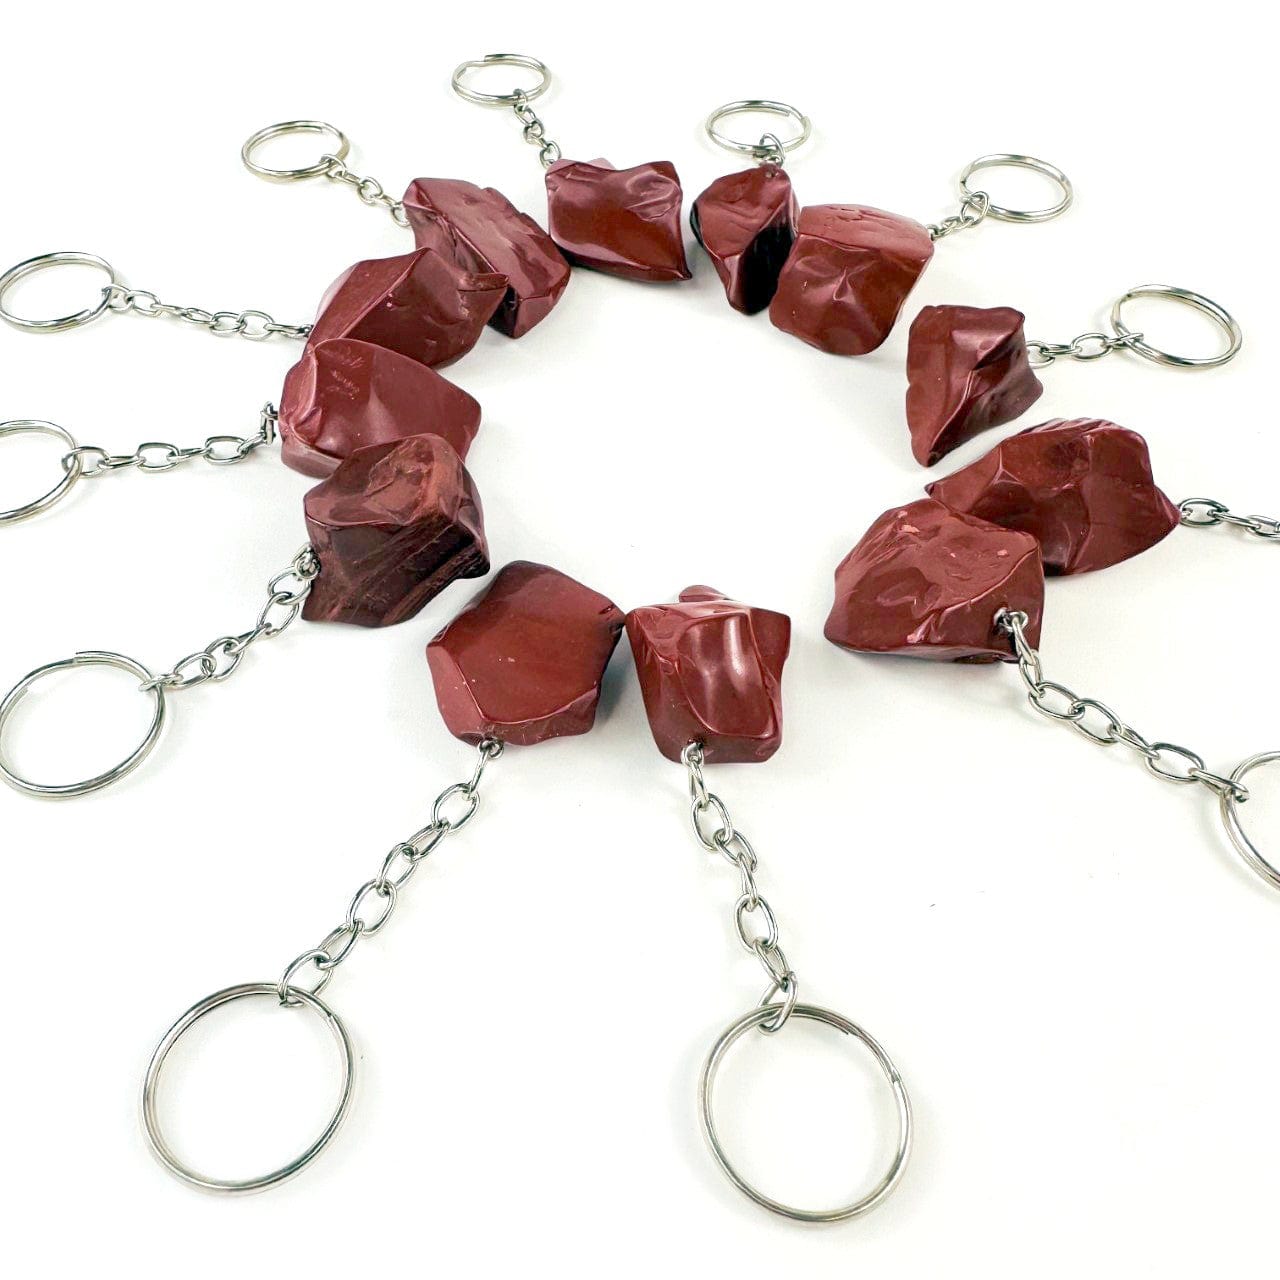 Red Jasper Polished Freeform Silver Toned Key Chains from an angle showing a side view